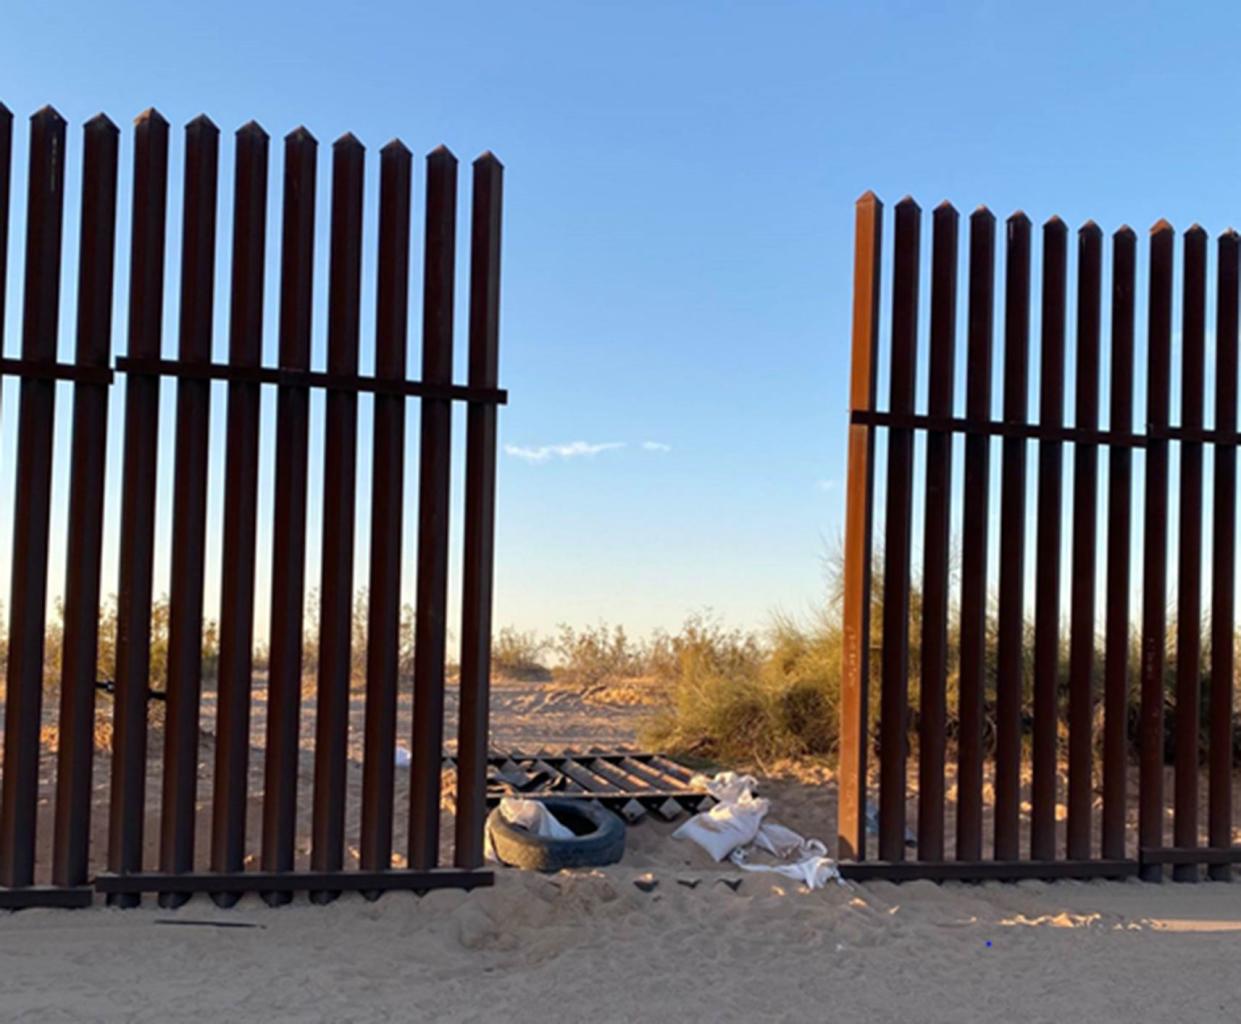 The overloaded SUV that crashed into a semi-truck in Southern California, killing 13 of the 25 people inside the car, entered the U.S. through a 10-foot hole cut into a fence at the border with Mexico. 